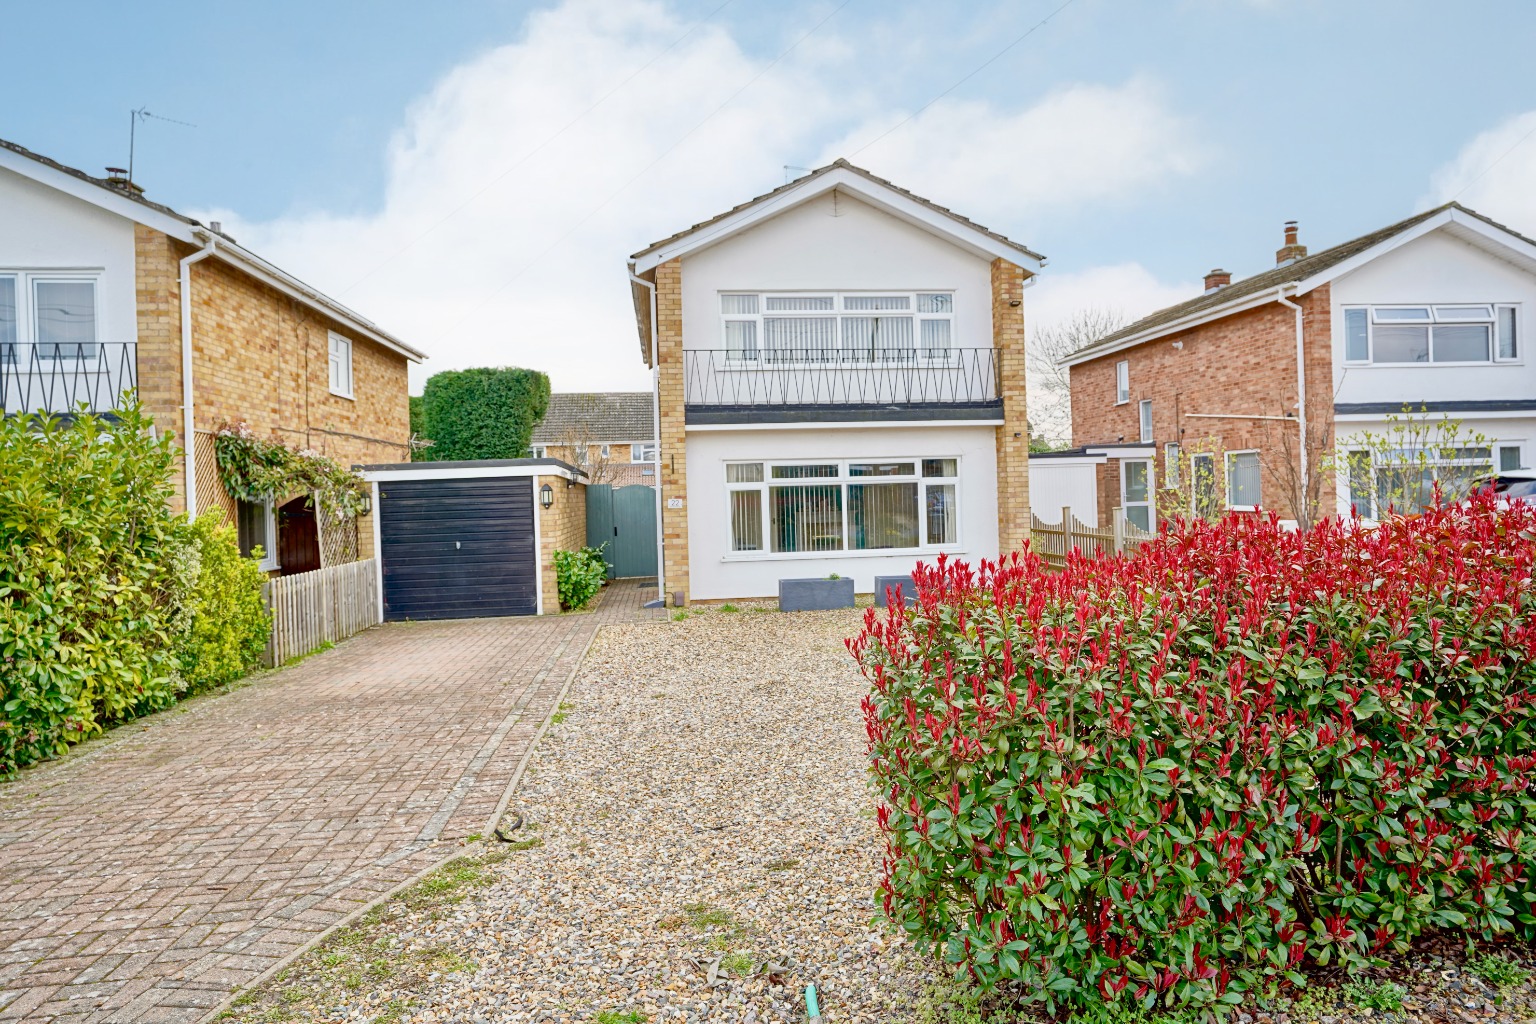 3 bed detached house for sale in Wheatfields, St Ives - Property Image 1